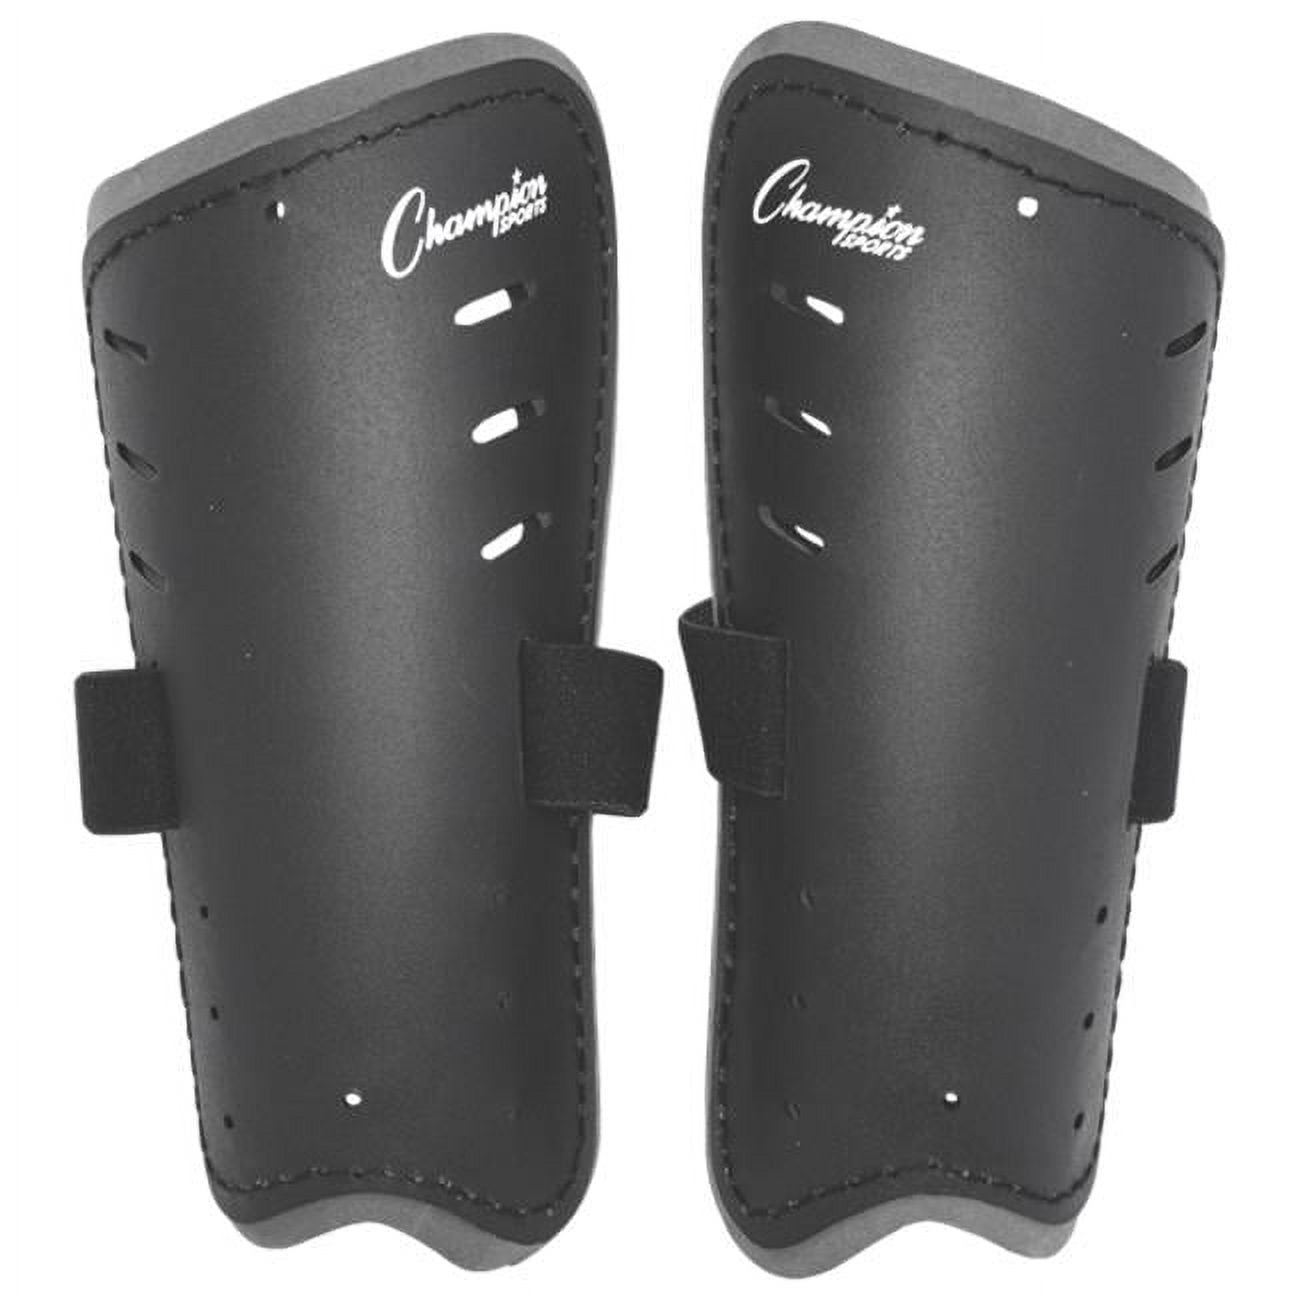 Picture of Champion Sports PSBX 7 in. Soccer Shinguard